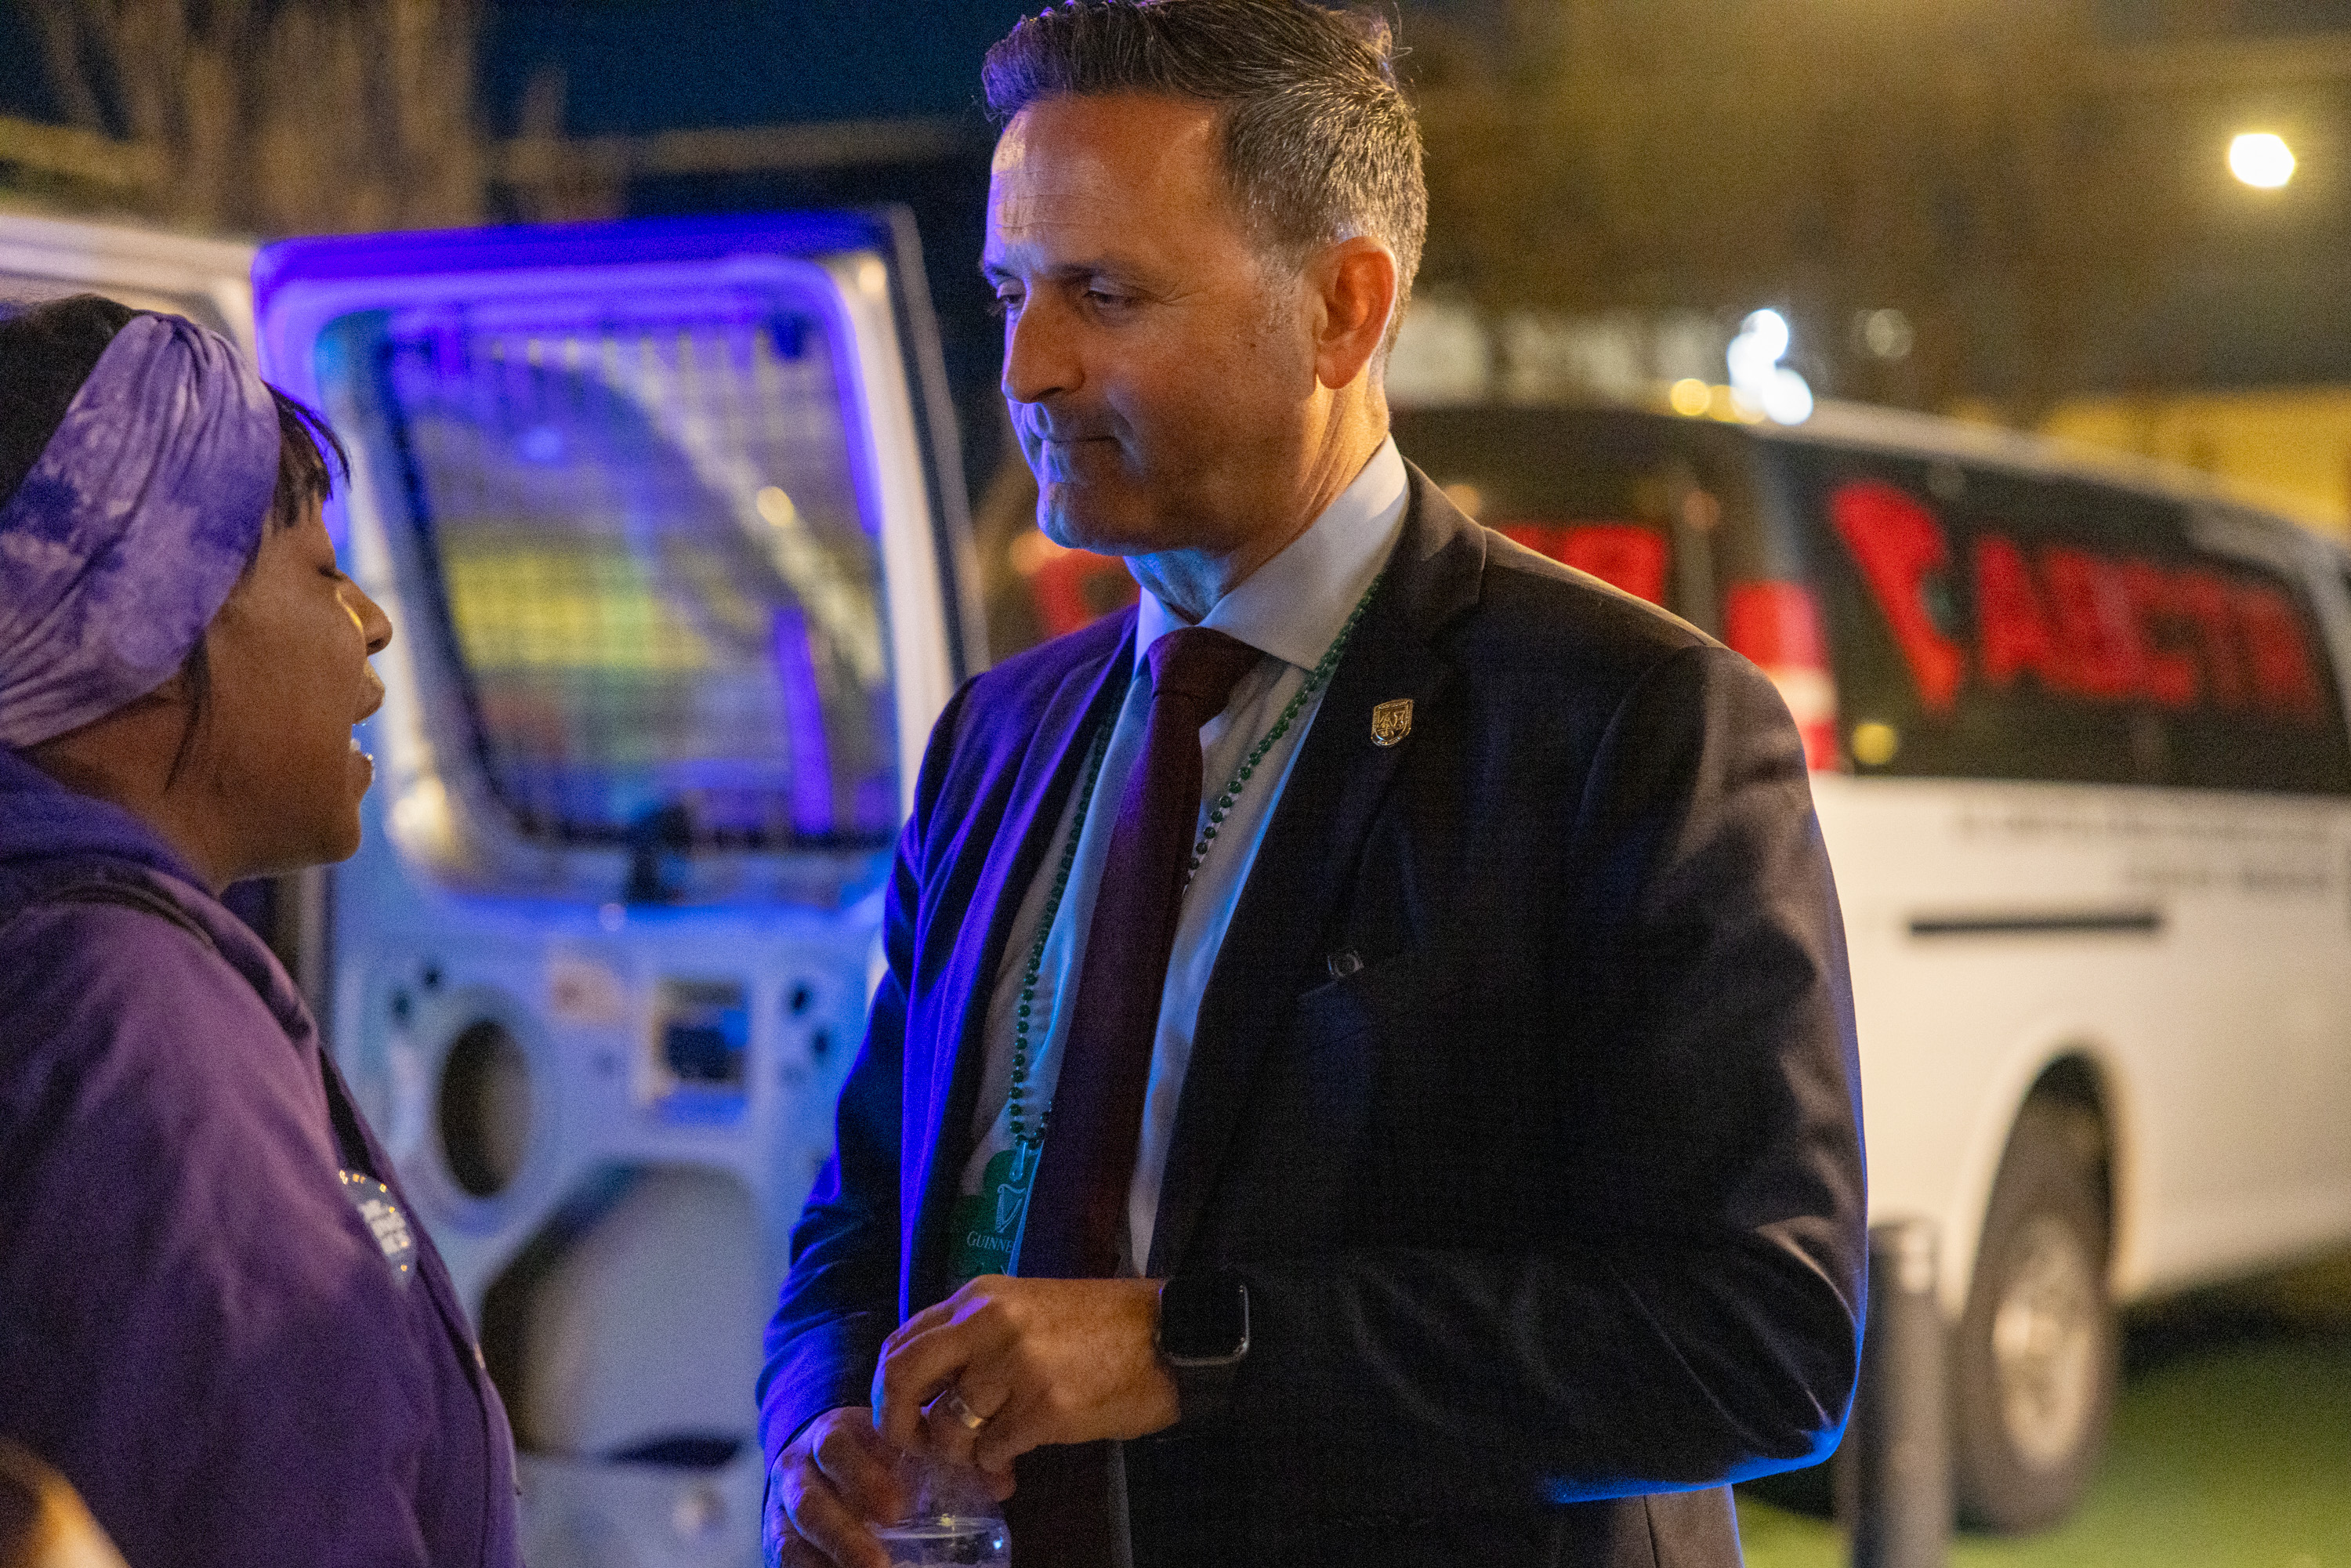 A man in a suit converses with a woman outside at night, near a lit-up ambulance.